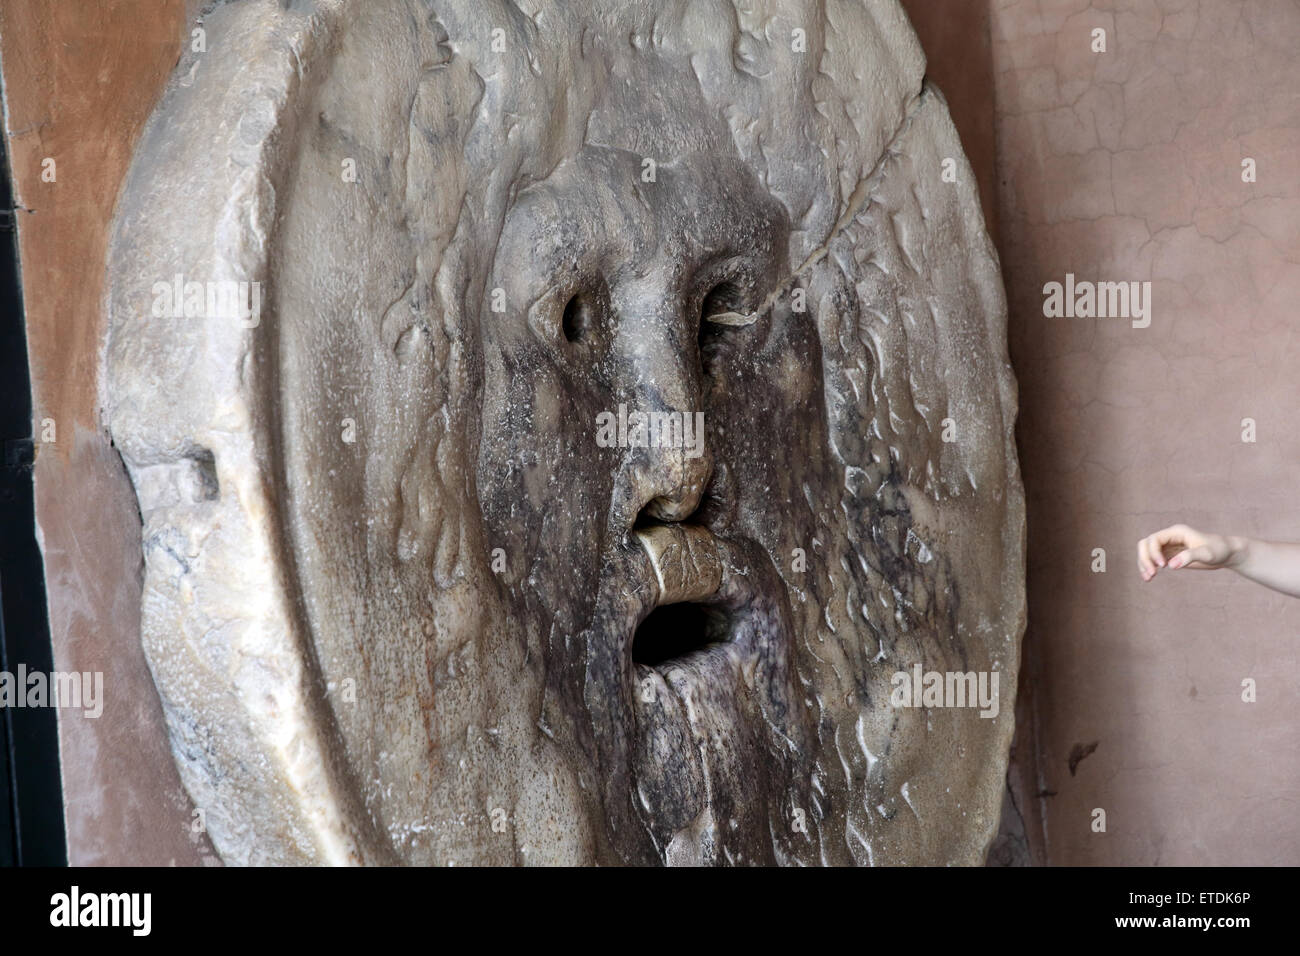 A hand about to enter the Bocca della Verita or Mouth of Truth in St Mary in Cosmedin in Rome. Stock Photo